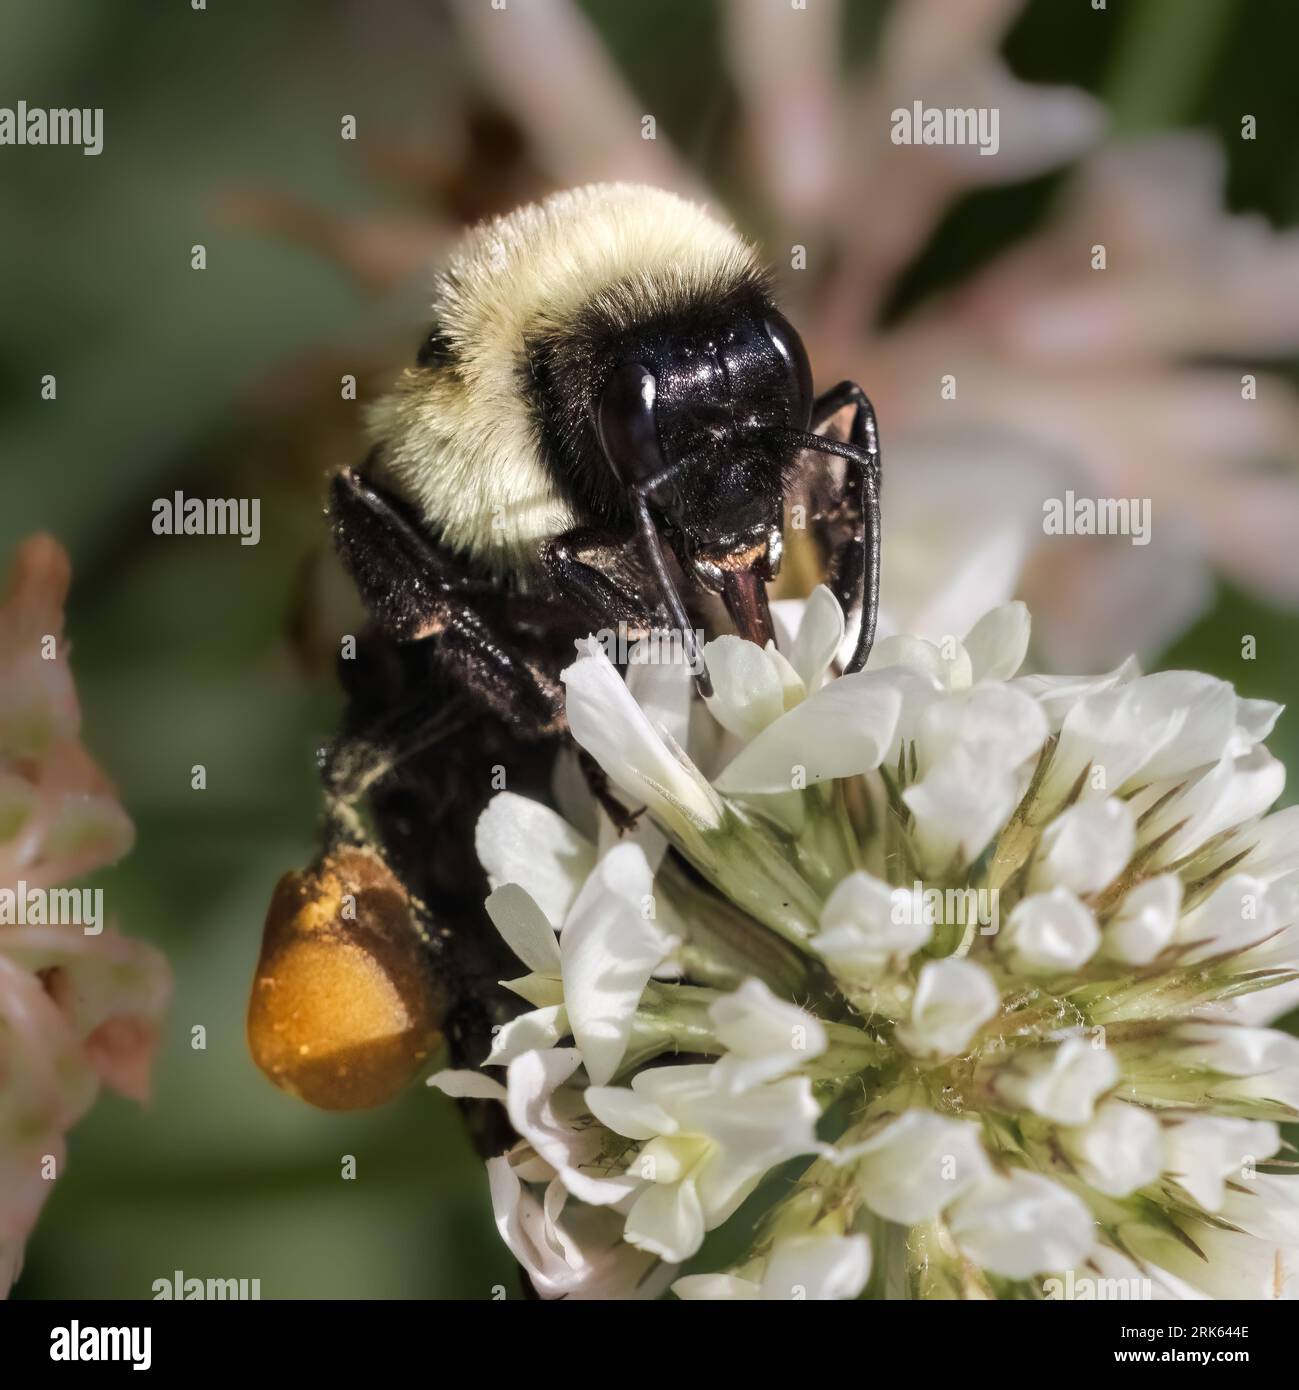 A female Common Eastern Bumble Bee (Bombus impatiens) pollinating a white clover flower. Long Island, New York, USA Stock Photo